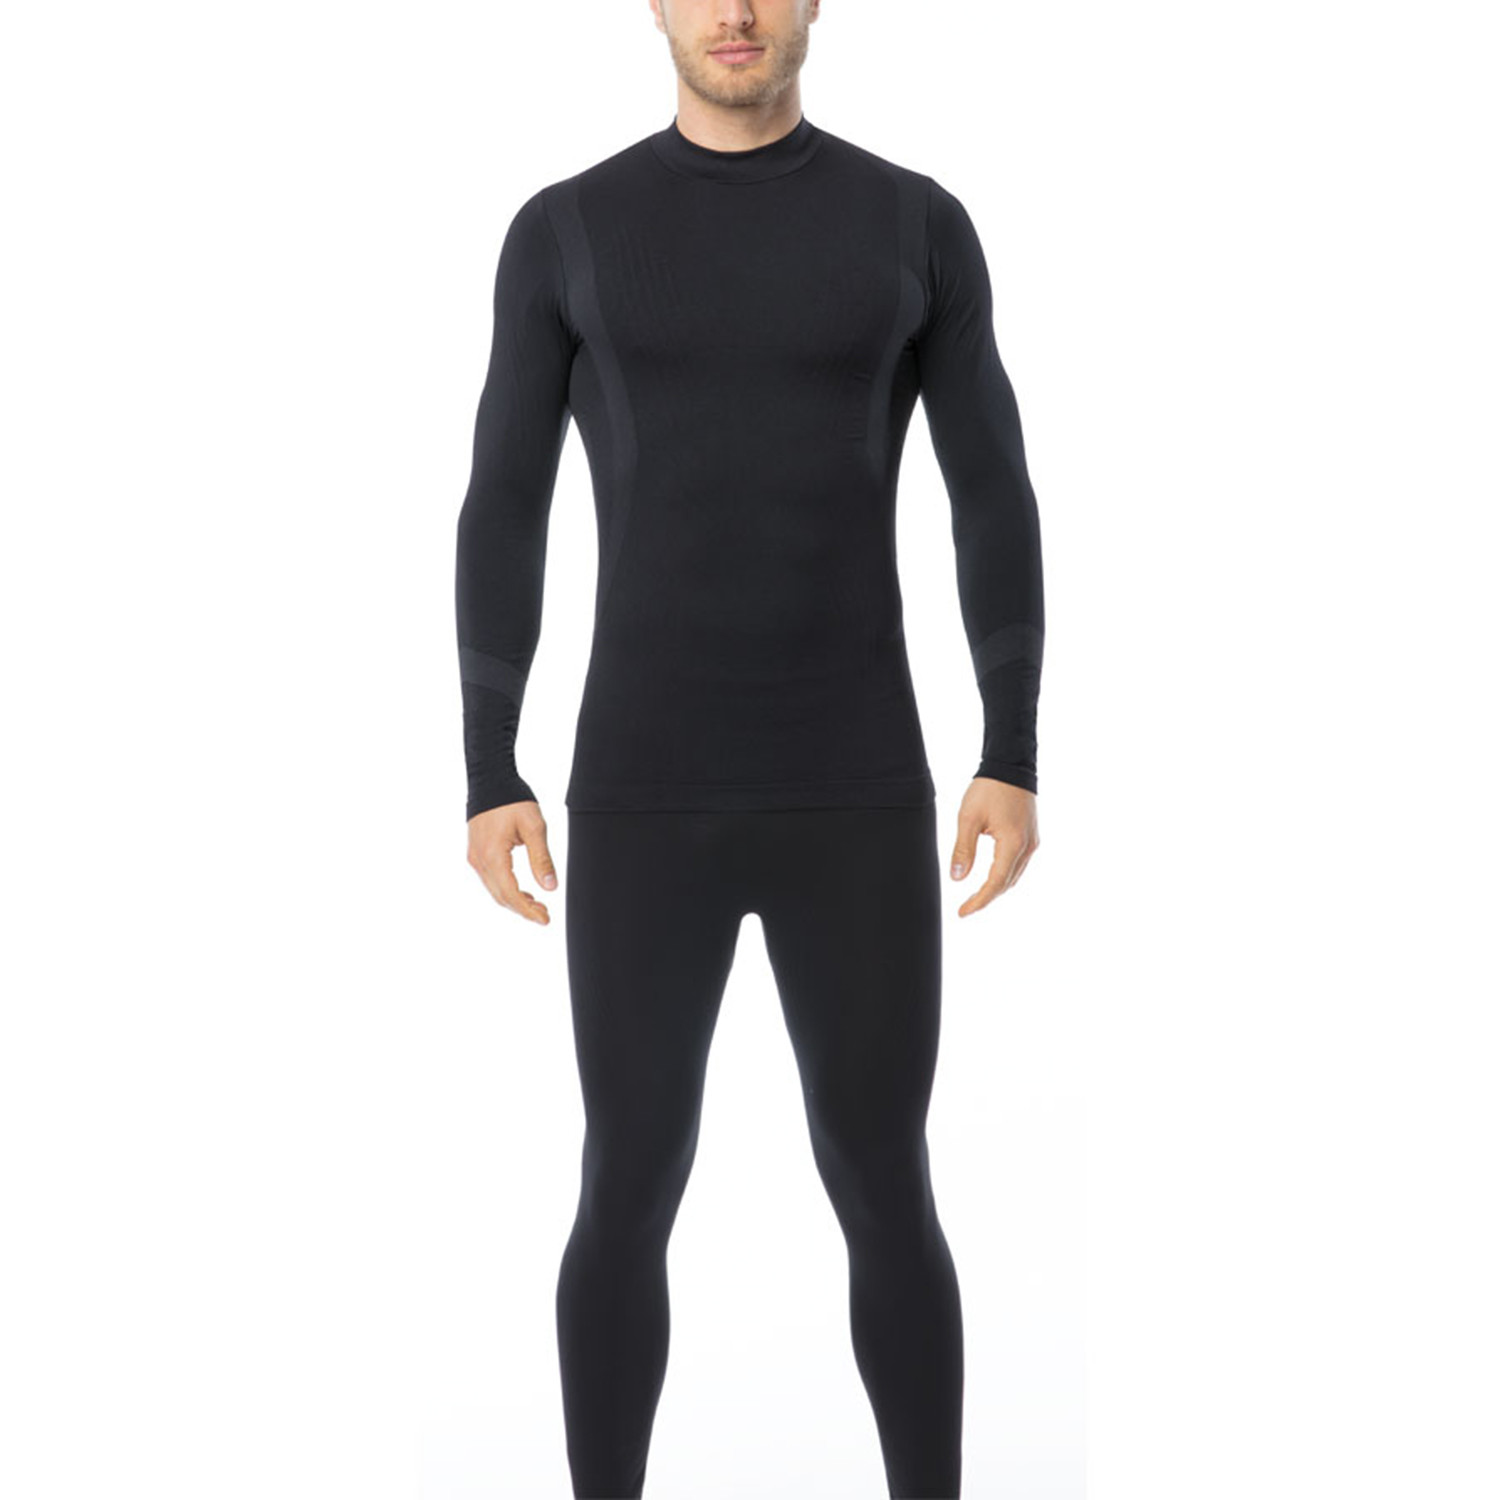 Iron-Ic // Long Sleeve Thermal T-Shirt // Black (S-M) - Norman Group ...